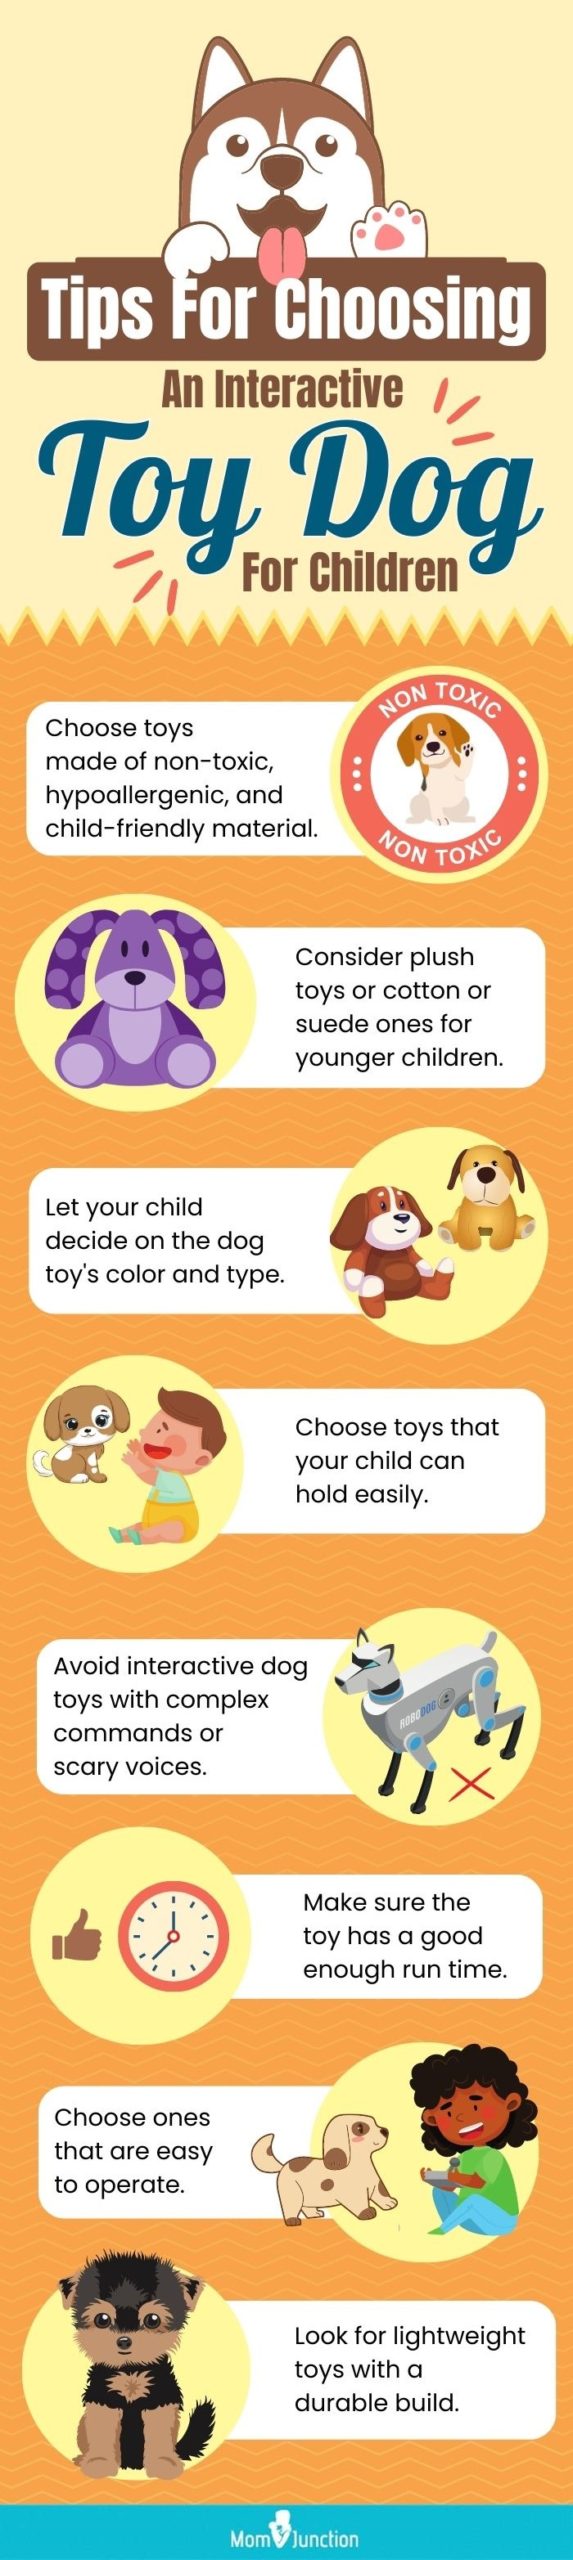 Tips For Choosing An Interactive Toy Dog For Children (infographic)